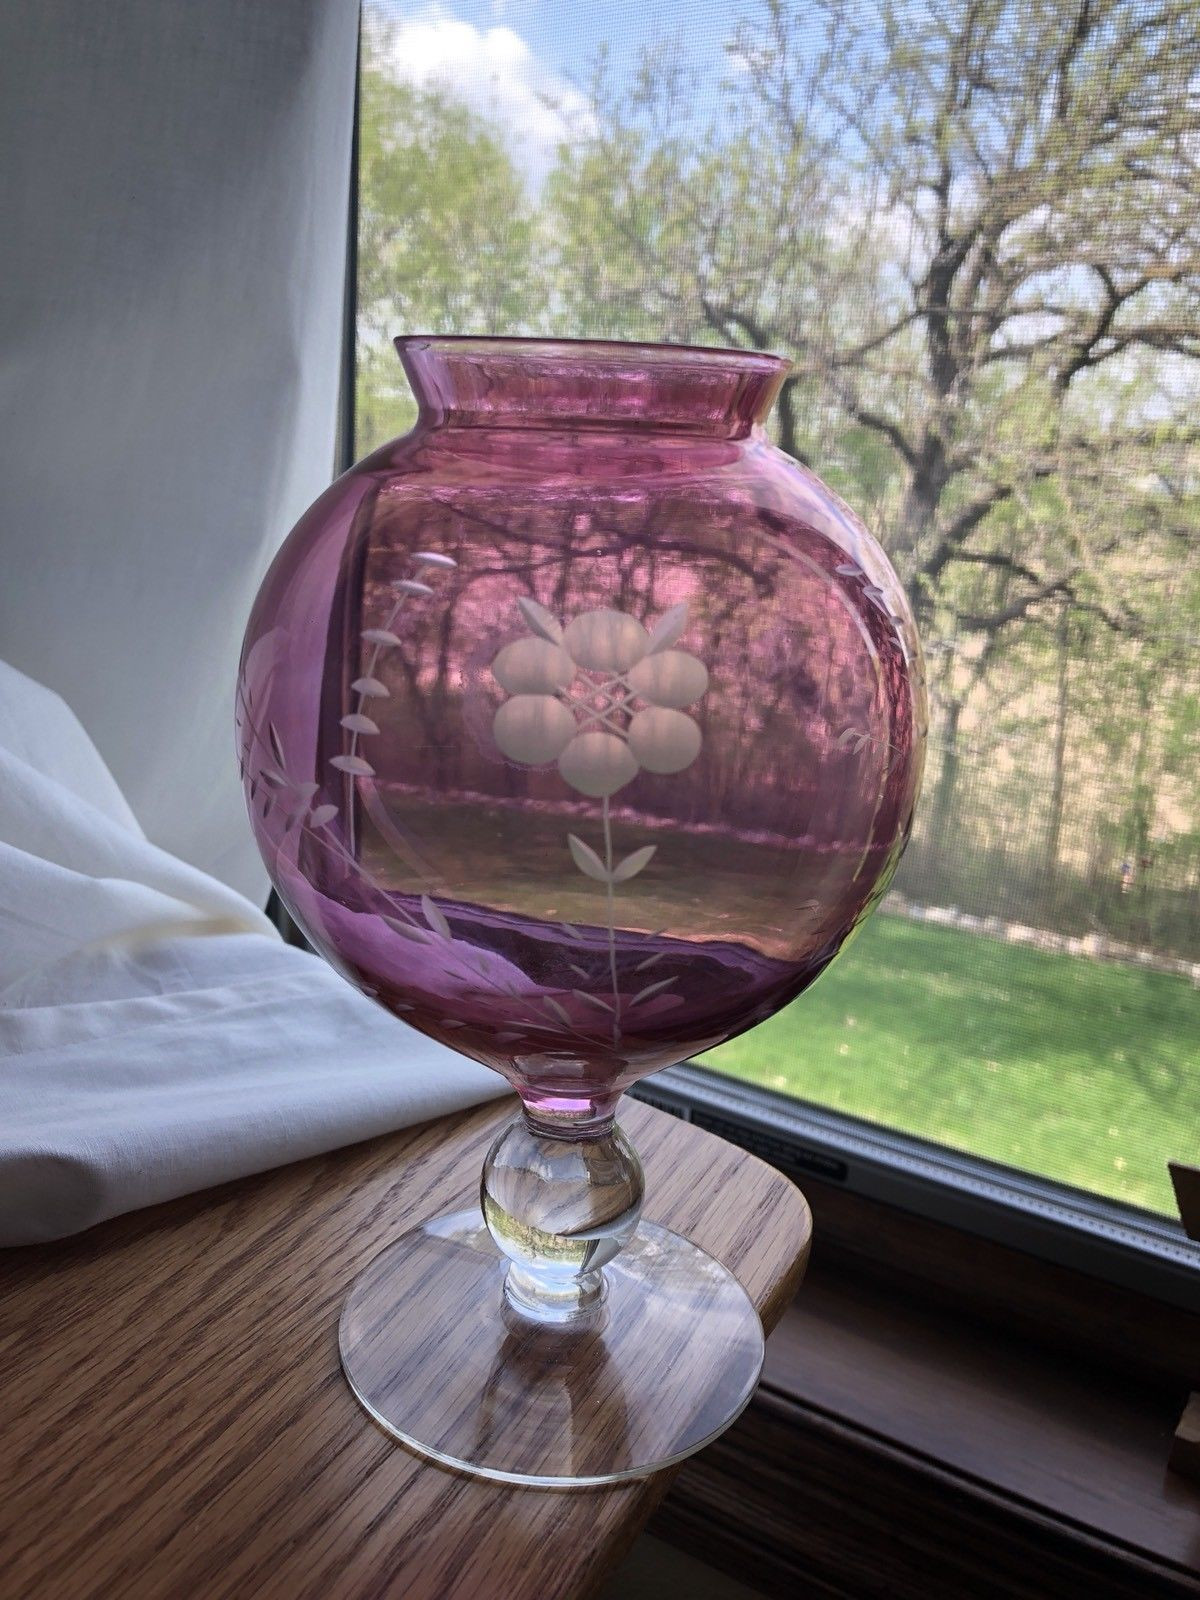 20 Popular Fenton Cranberry Coin Dot Vase 2024 free download fenton cranberry coin dot vase of cranberry glass vase antique ball shaped w cut etched ivy and with regard to cranberry glass vase antique ball shaped w cut etched ivy and floral design 1 o